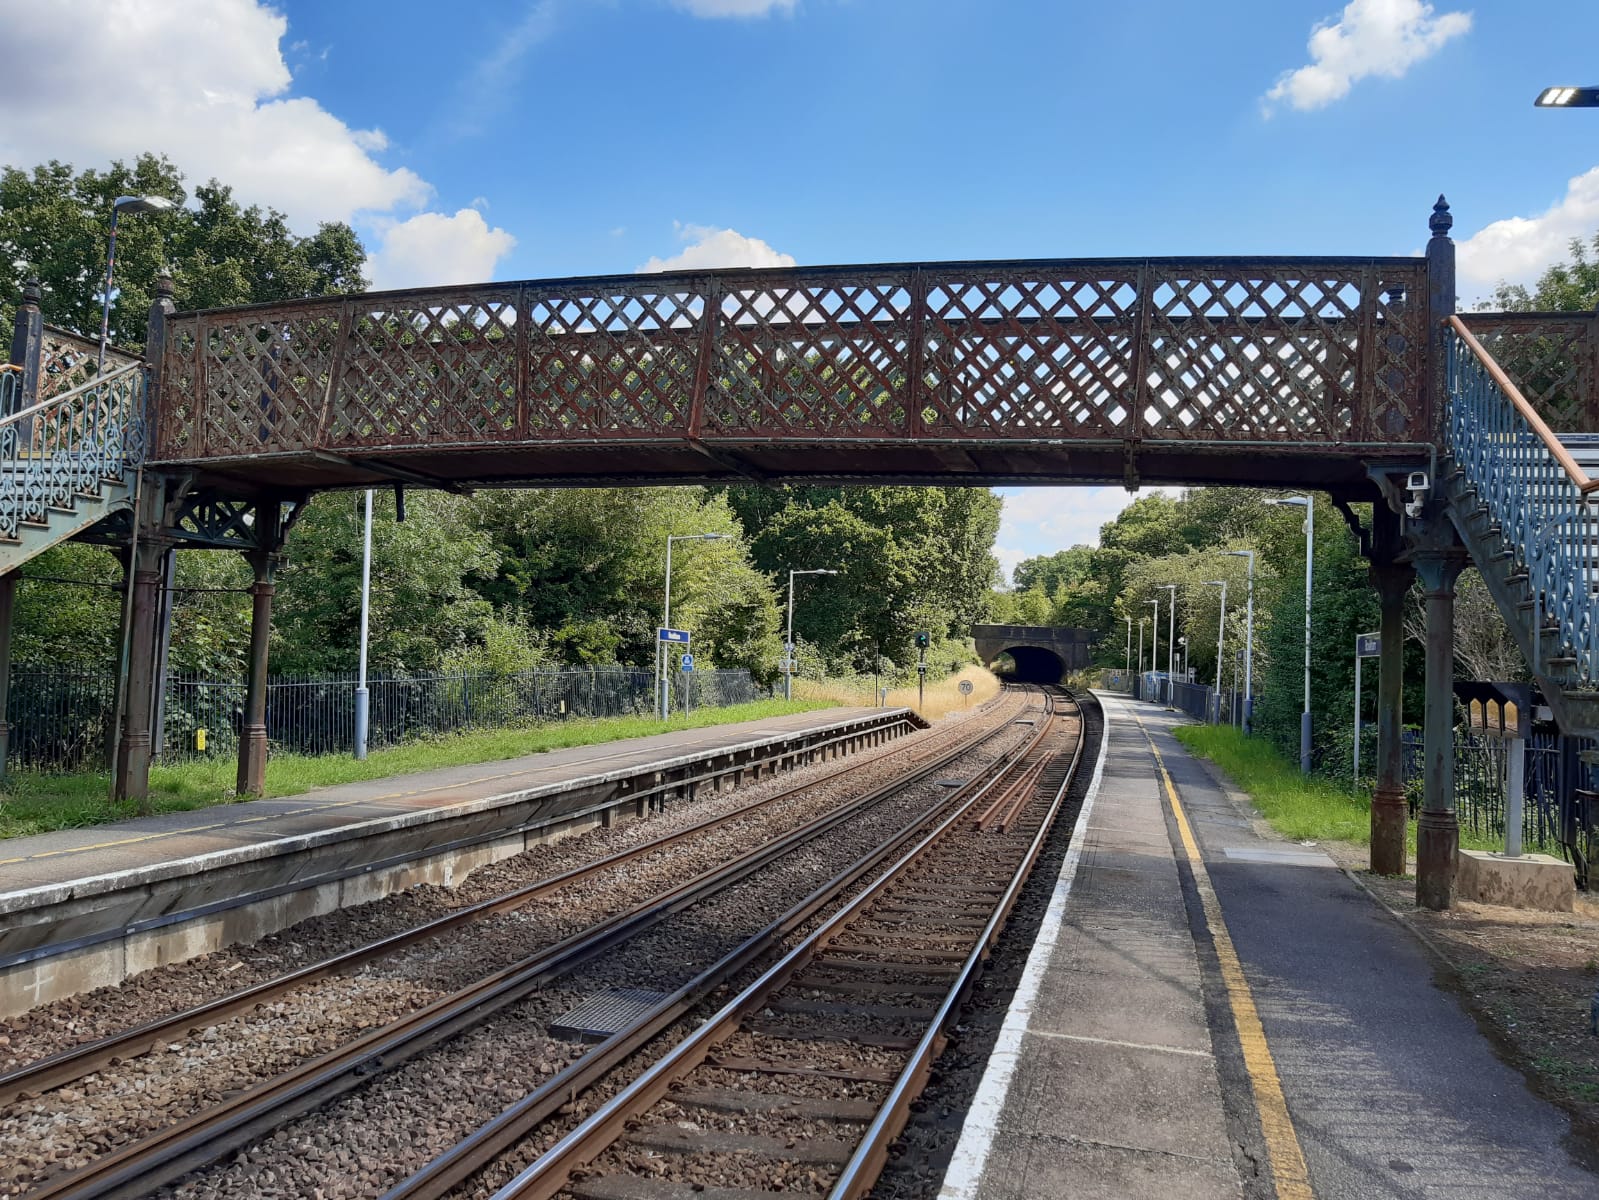 Work carries on – routine railway upgrades in July